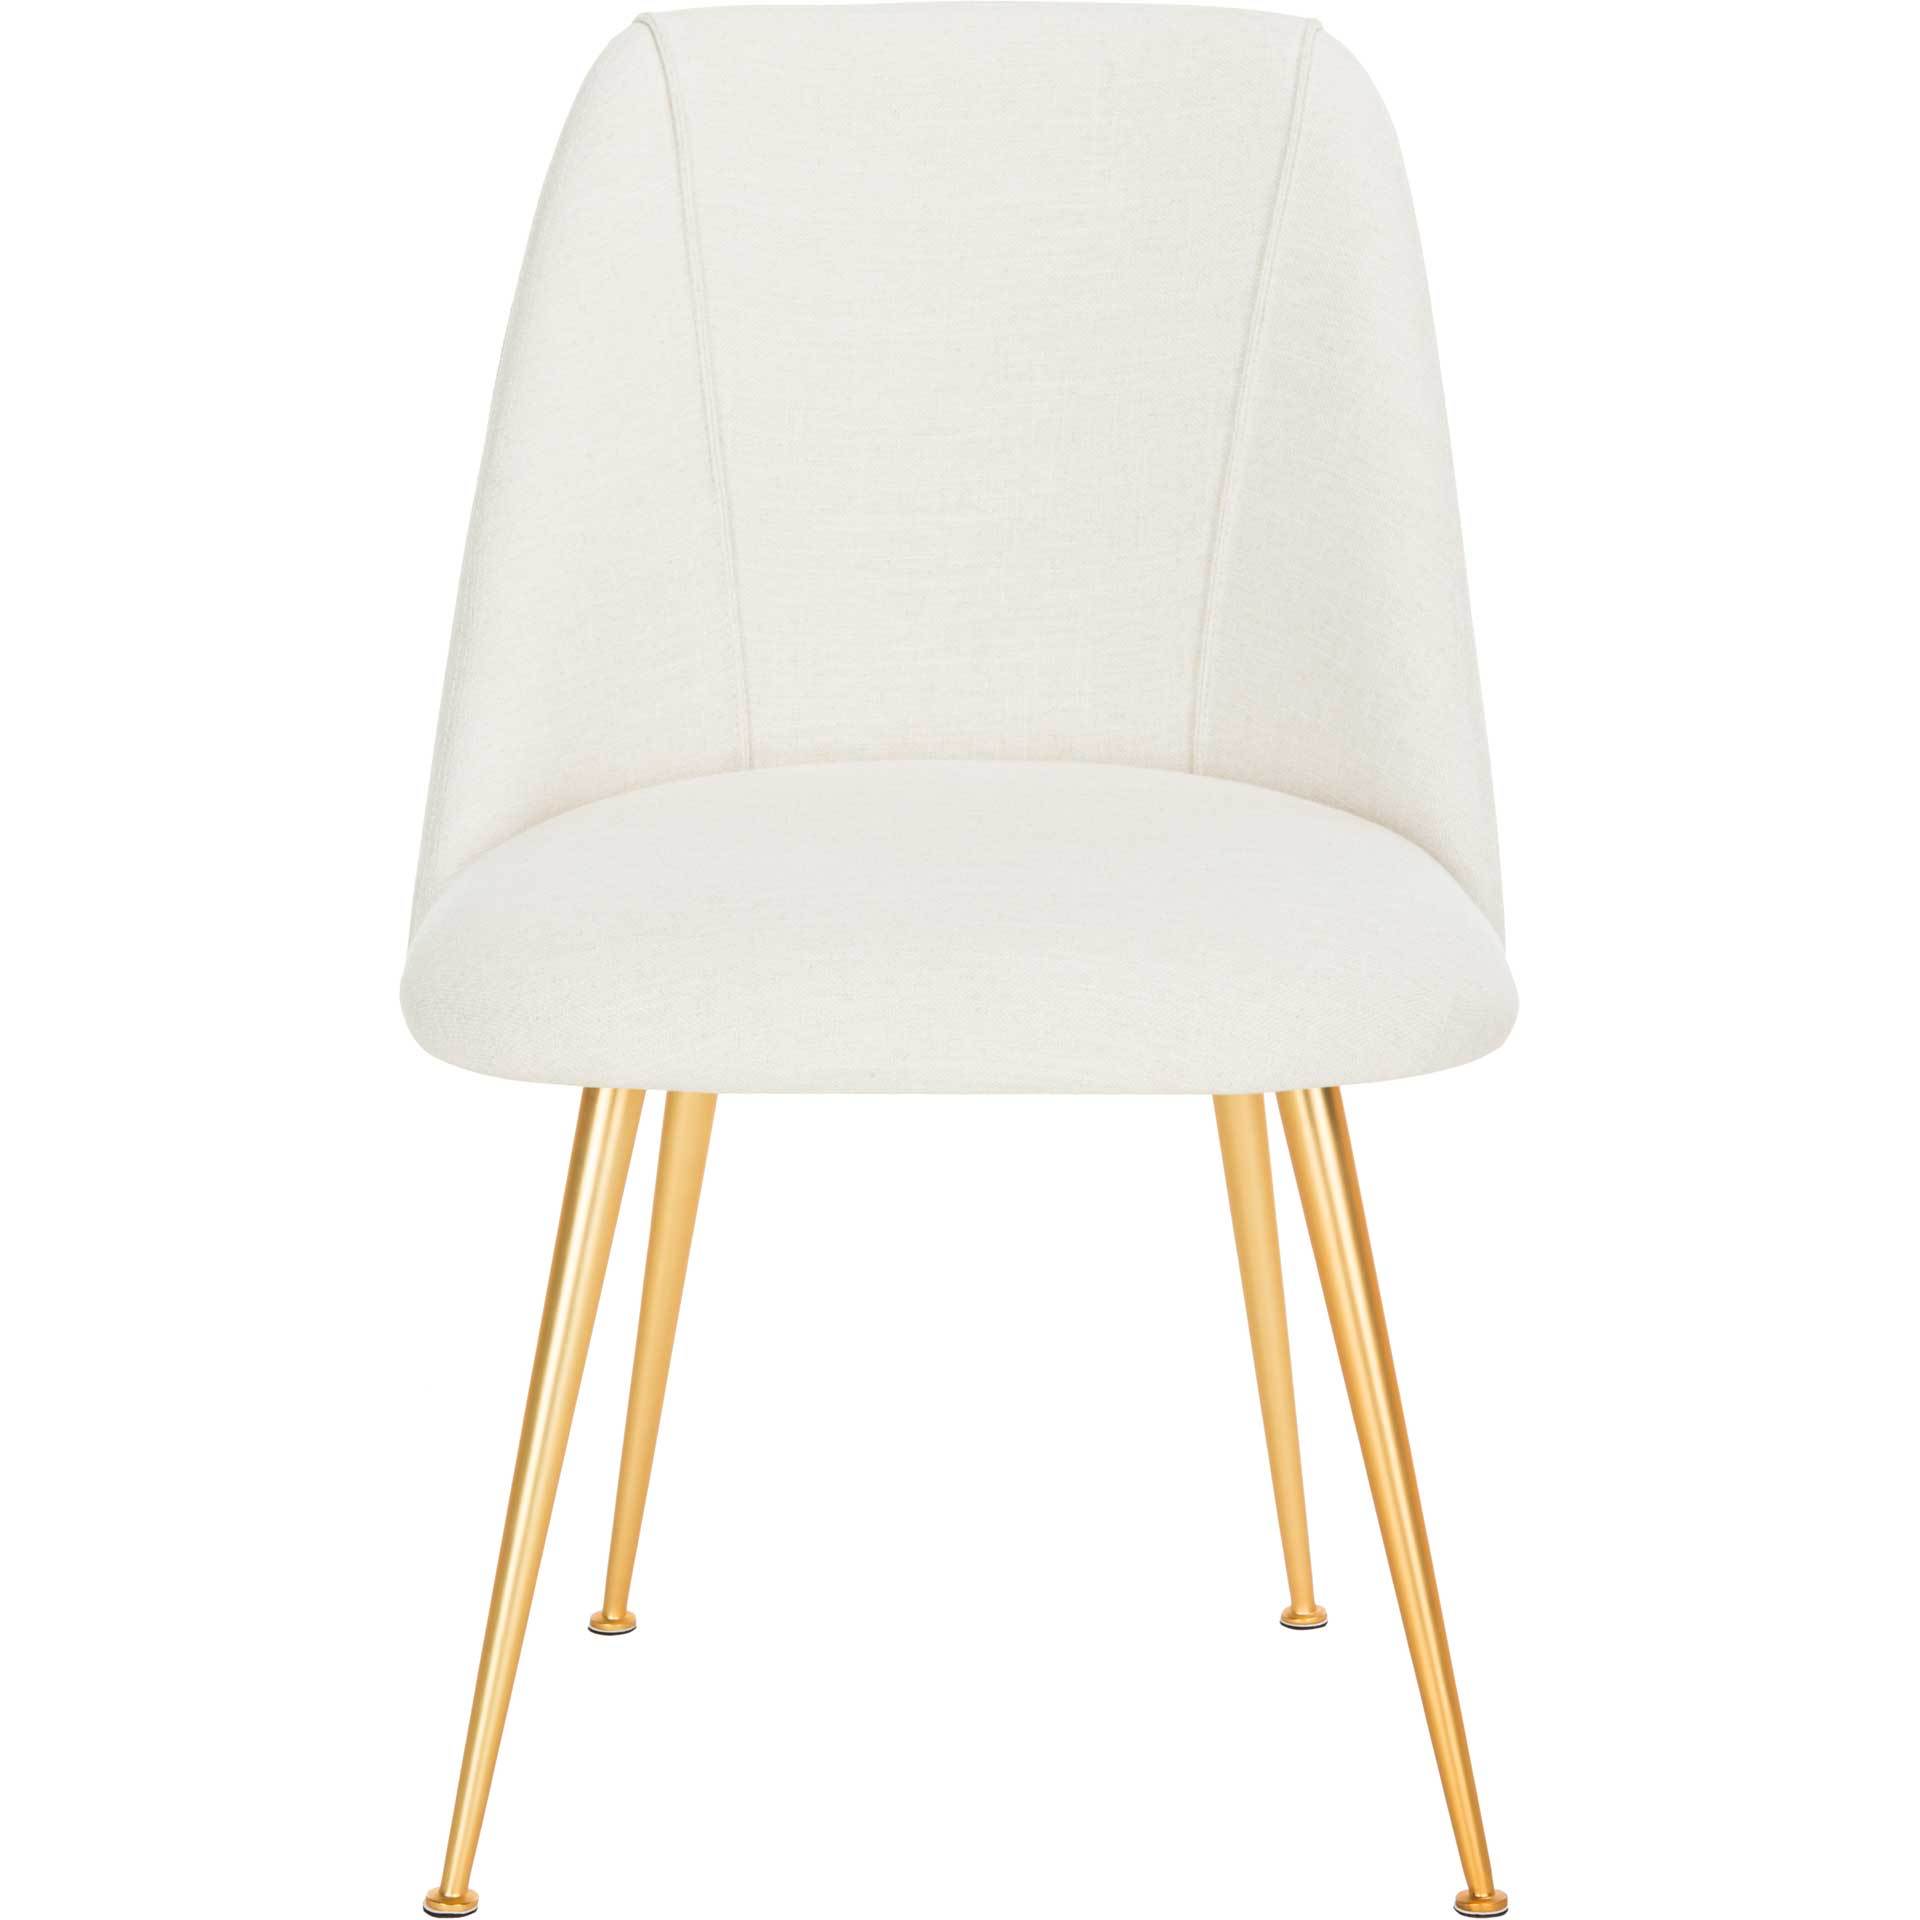 Forrest Side Chair Creme/Gold